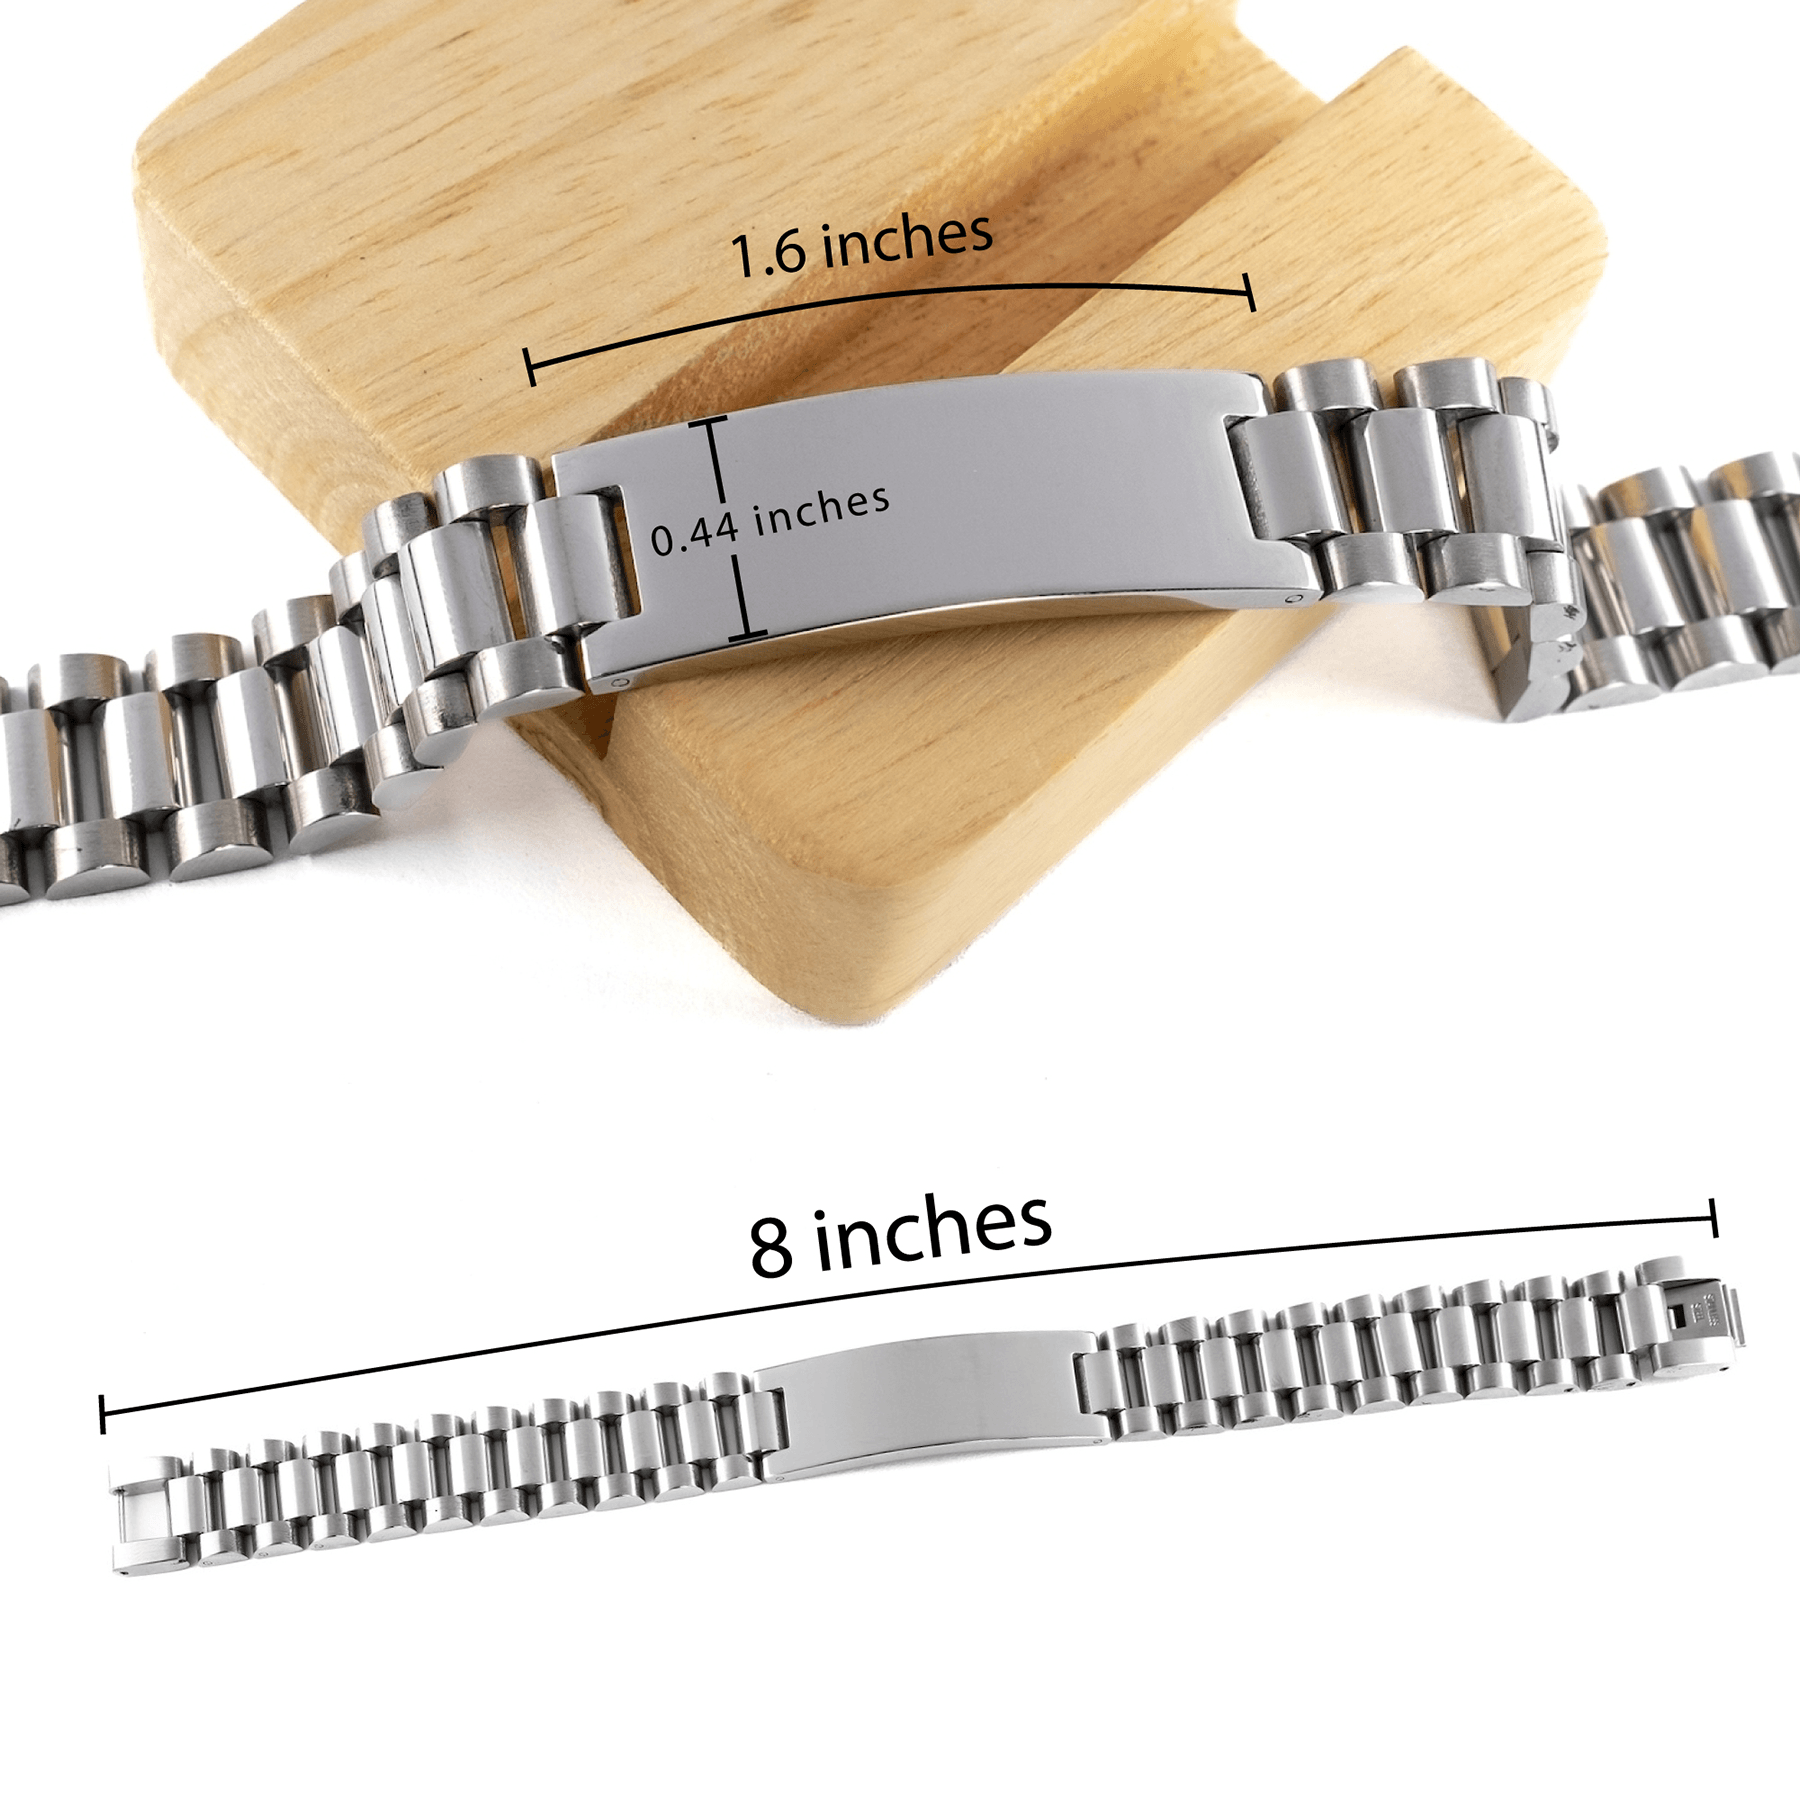 Missionary Ladder Stainless Steel Engraved Bracelet - Thanks for being who you are - Birthday Christmas Jewelry Gifts Coworkers Colleague Boss - Mallard Moon Gift Shop